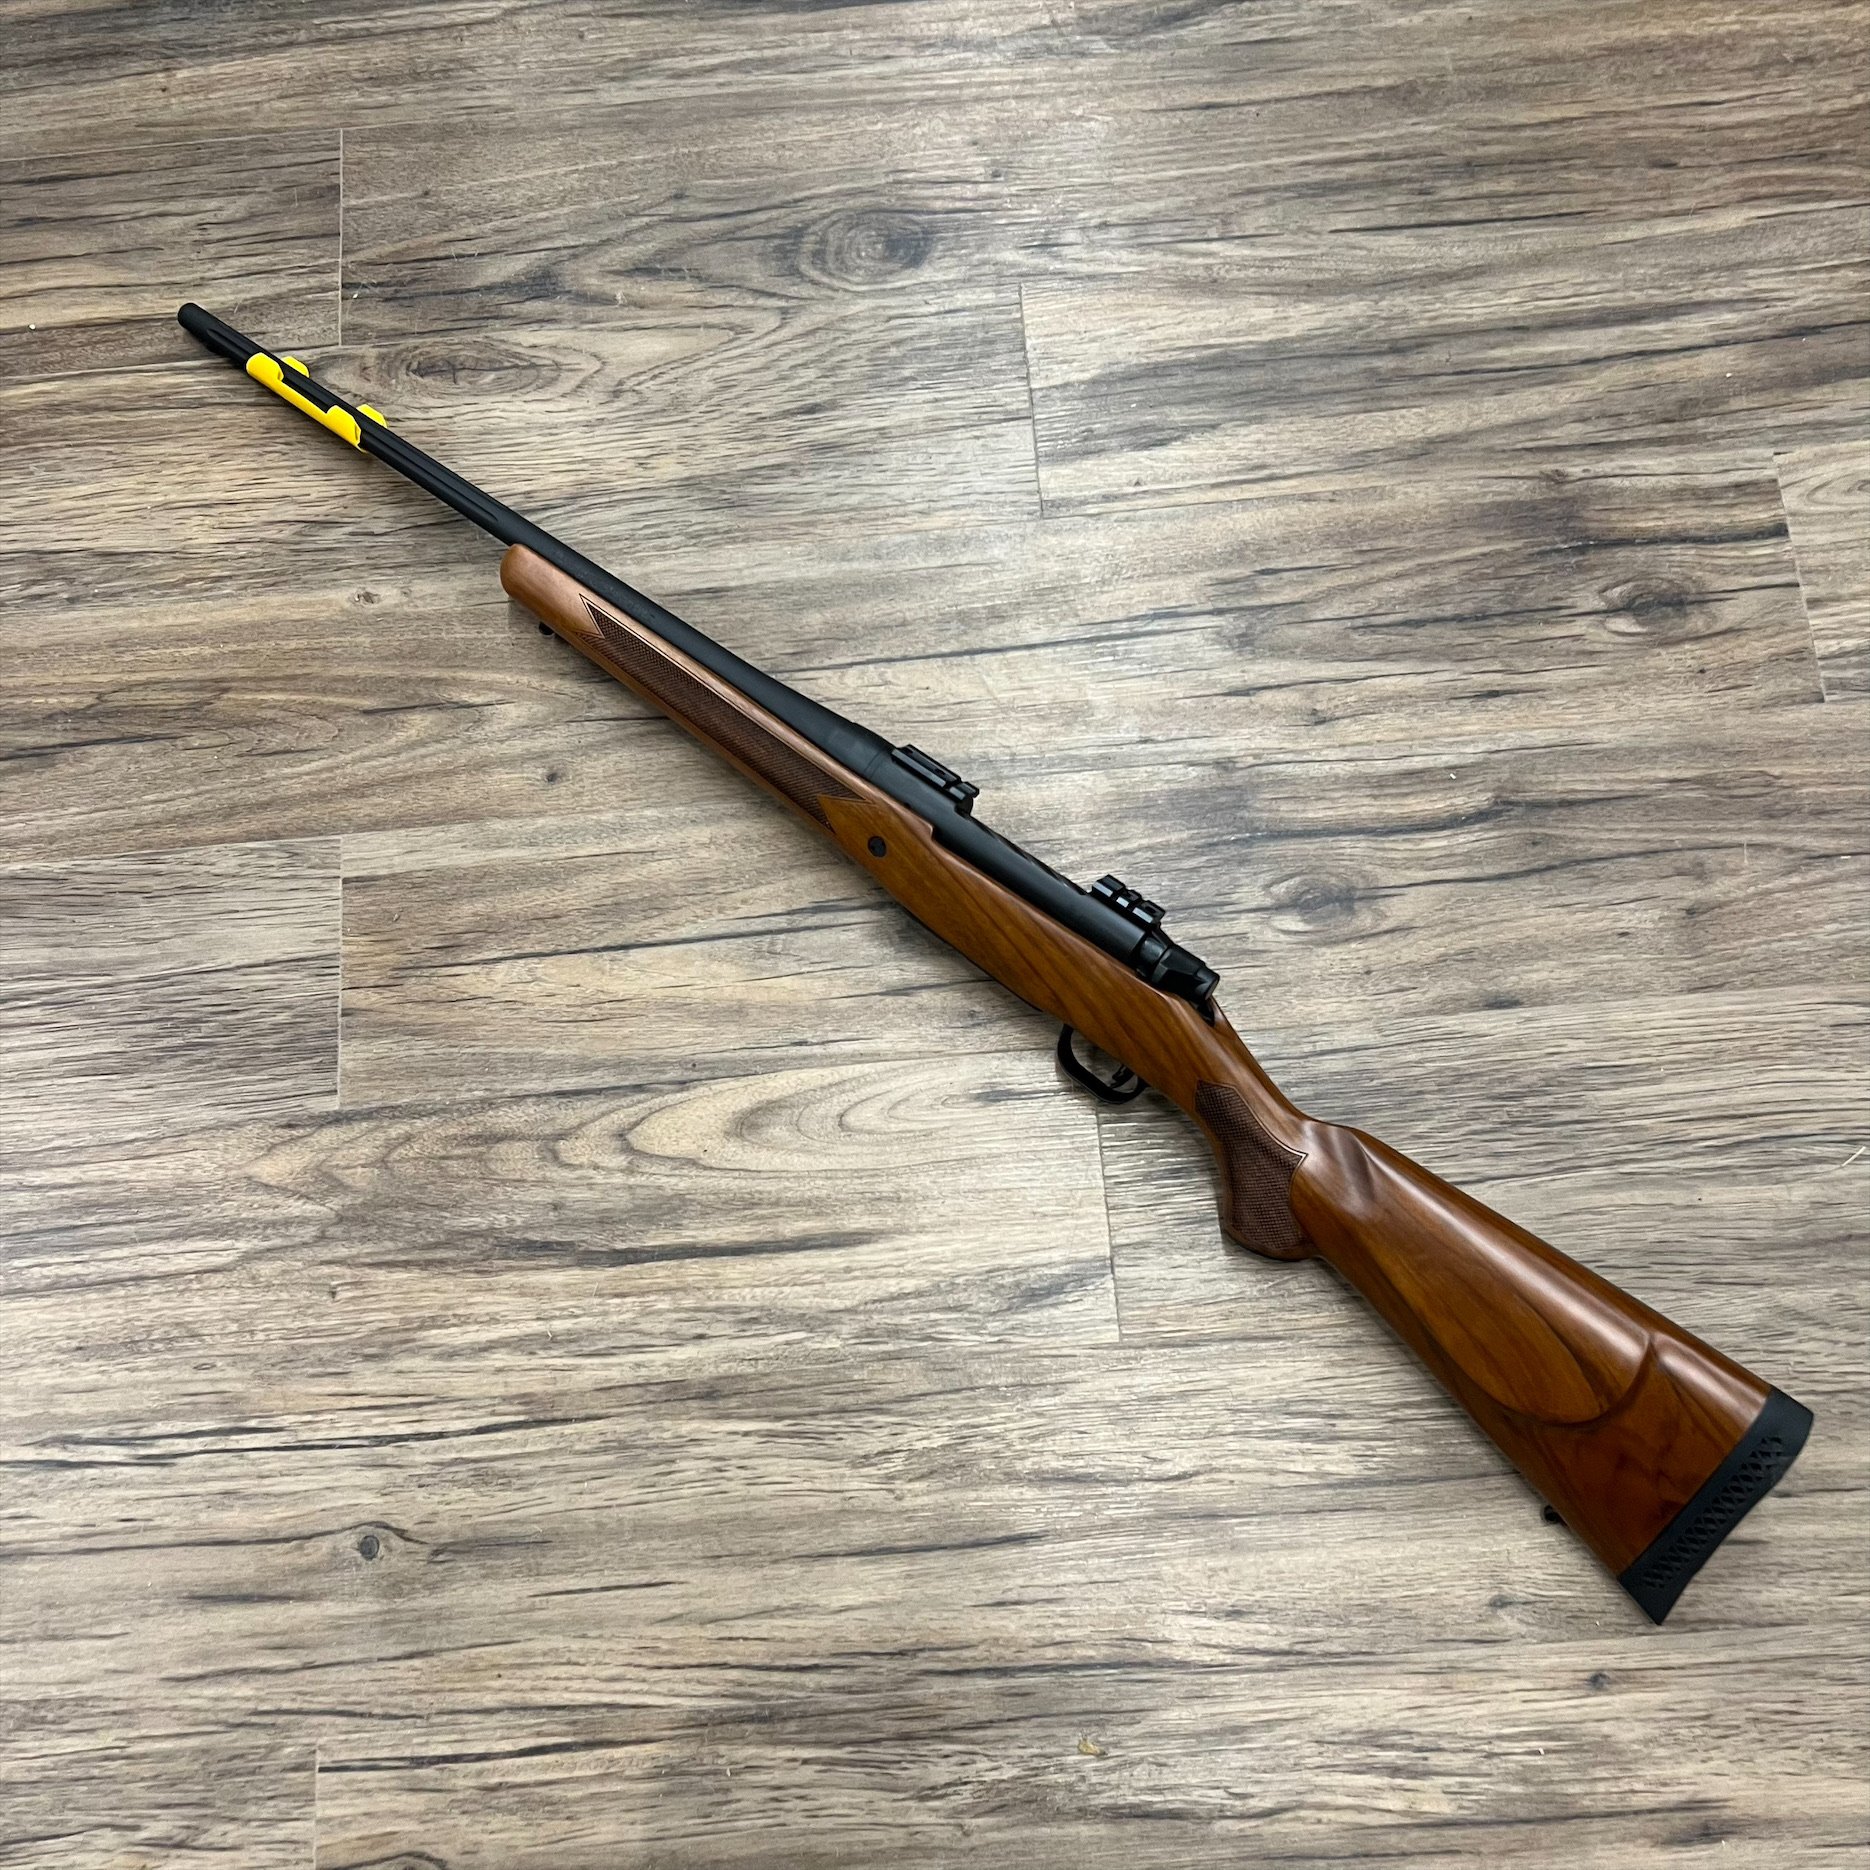 MOSSBERG MOSSBERG PATRIOT CLASSIC RIFLE, 30-06 SPRG, WALNUT STOCK, UNFIRED, PRE-OWNED